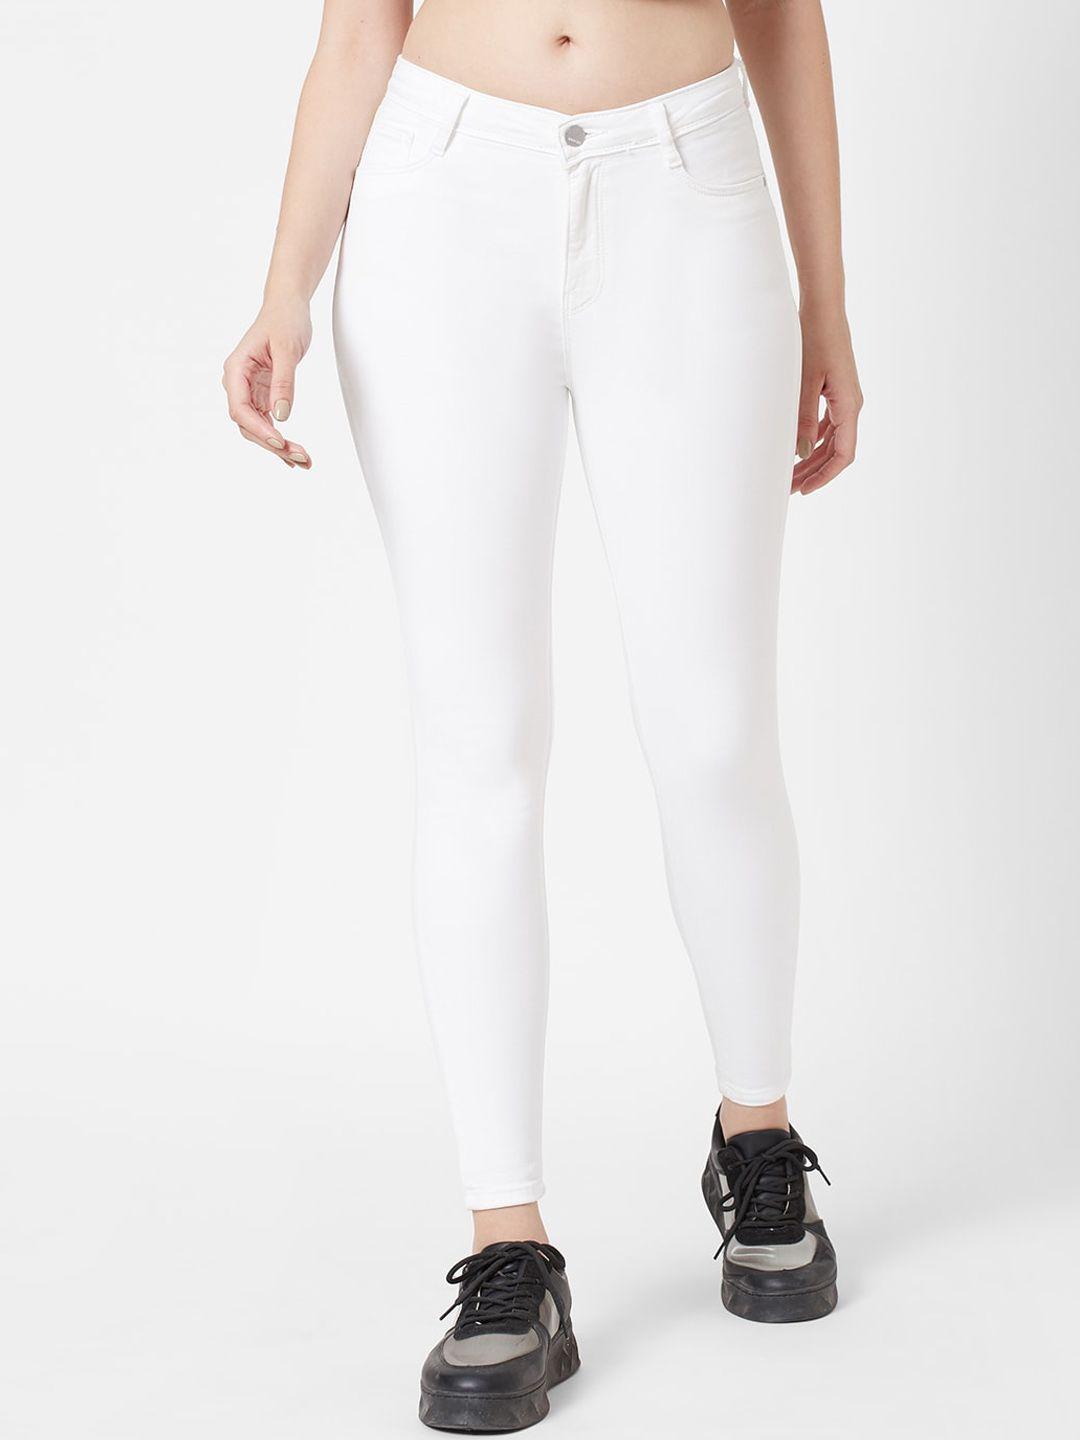 kraus-jeans-women-white-skinny-fit-high-rise-jeans